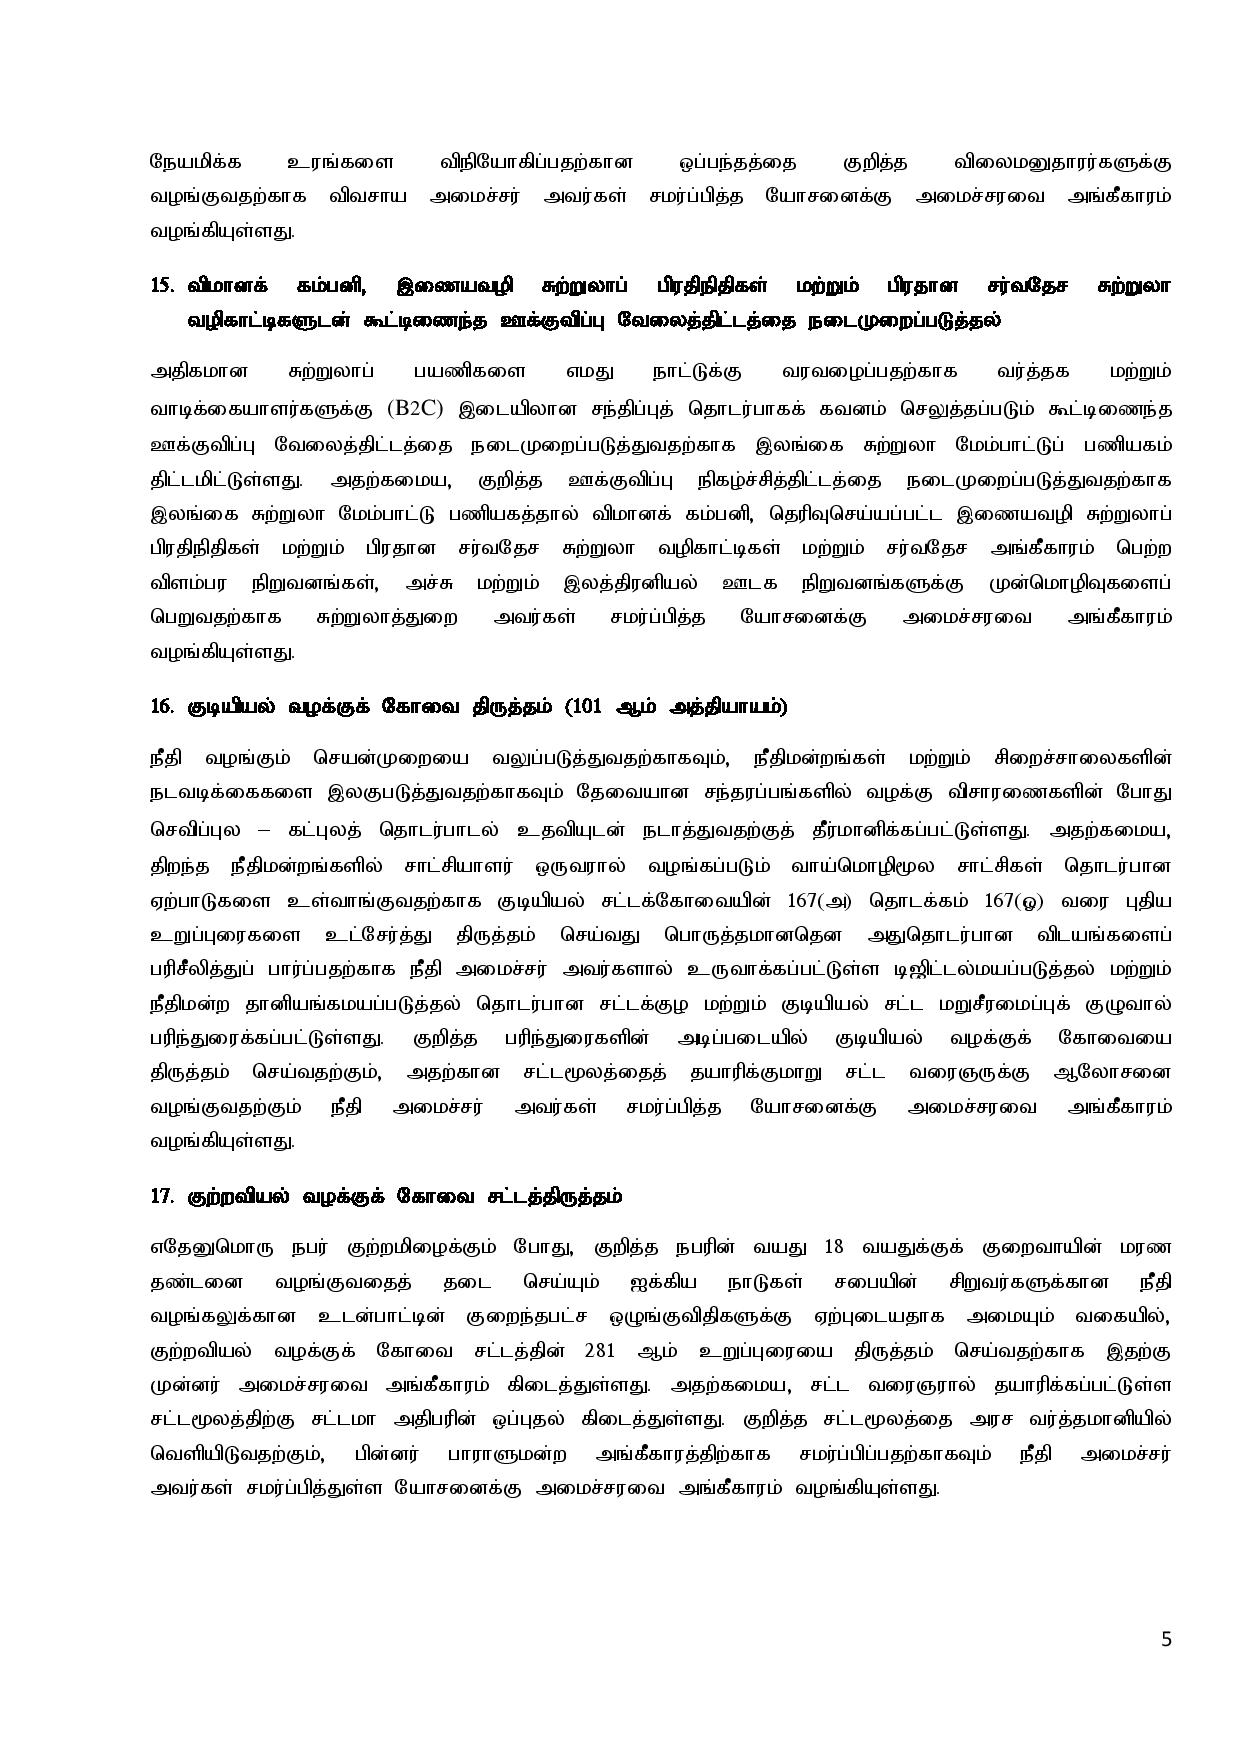 Cabinet Decisions on 14.03.2022 Tamil page 005